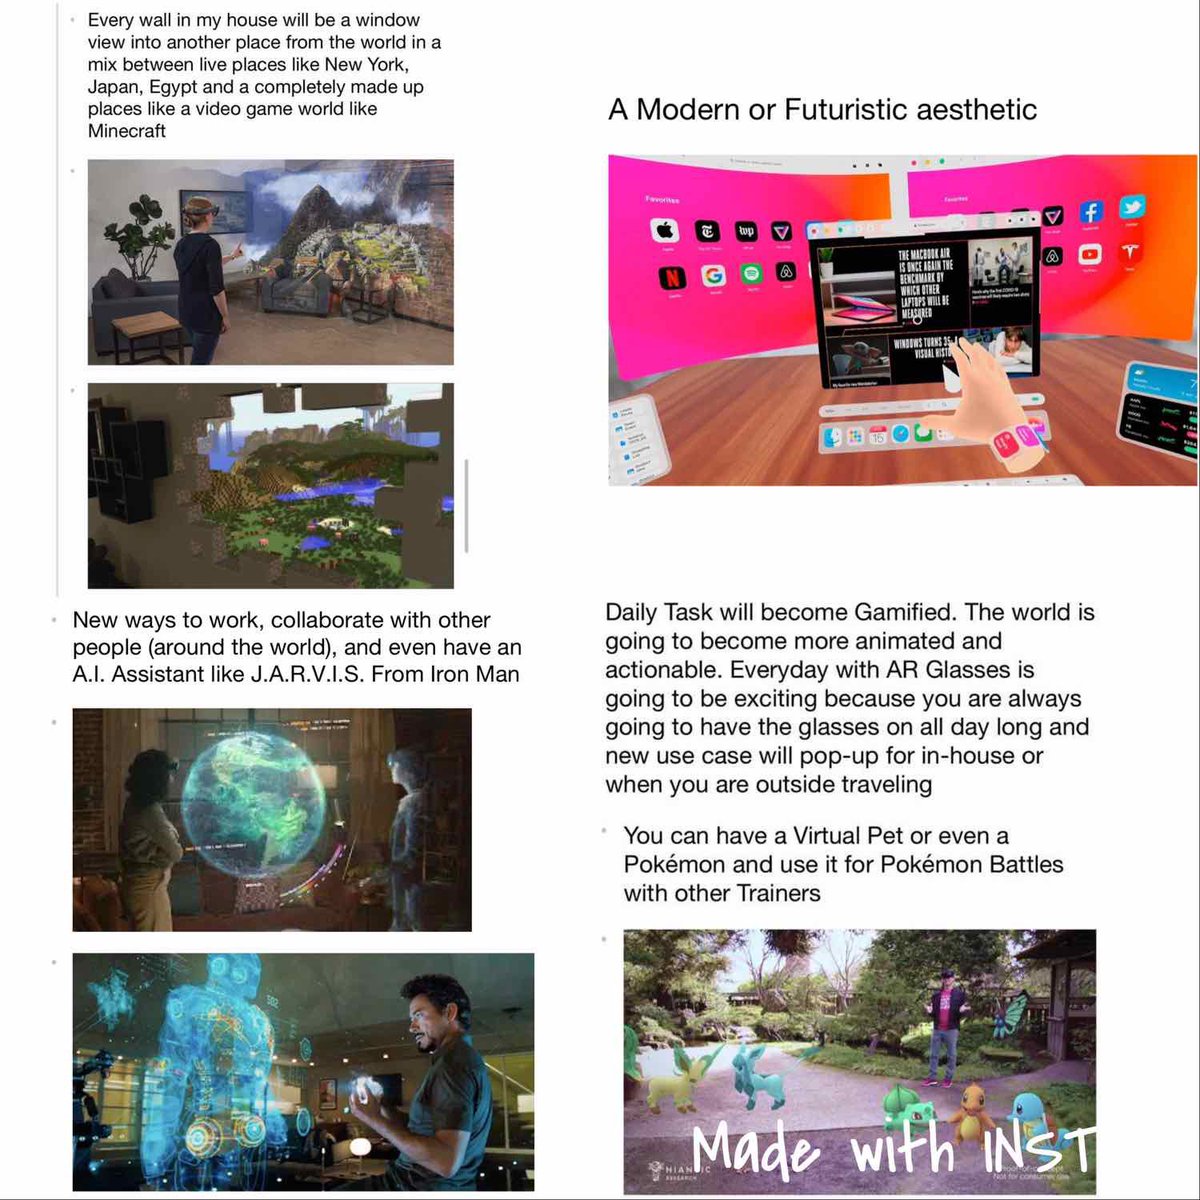 RT @AJRD2000: Examples of some use cases for Augmented Reality (Glasses). #Window #Realm #Minecraft #VideoGames #Metaverse #Apple #Work #Collaboration #AI #JARVIS #IronMan #TonyStark #Hologram #Gamified #Gamification #VirtualPet #Interactive #Animated #L…